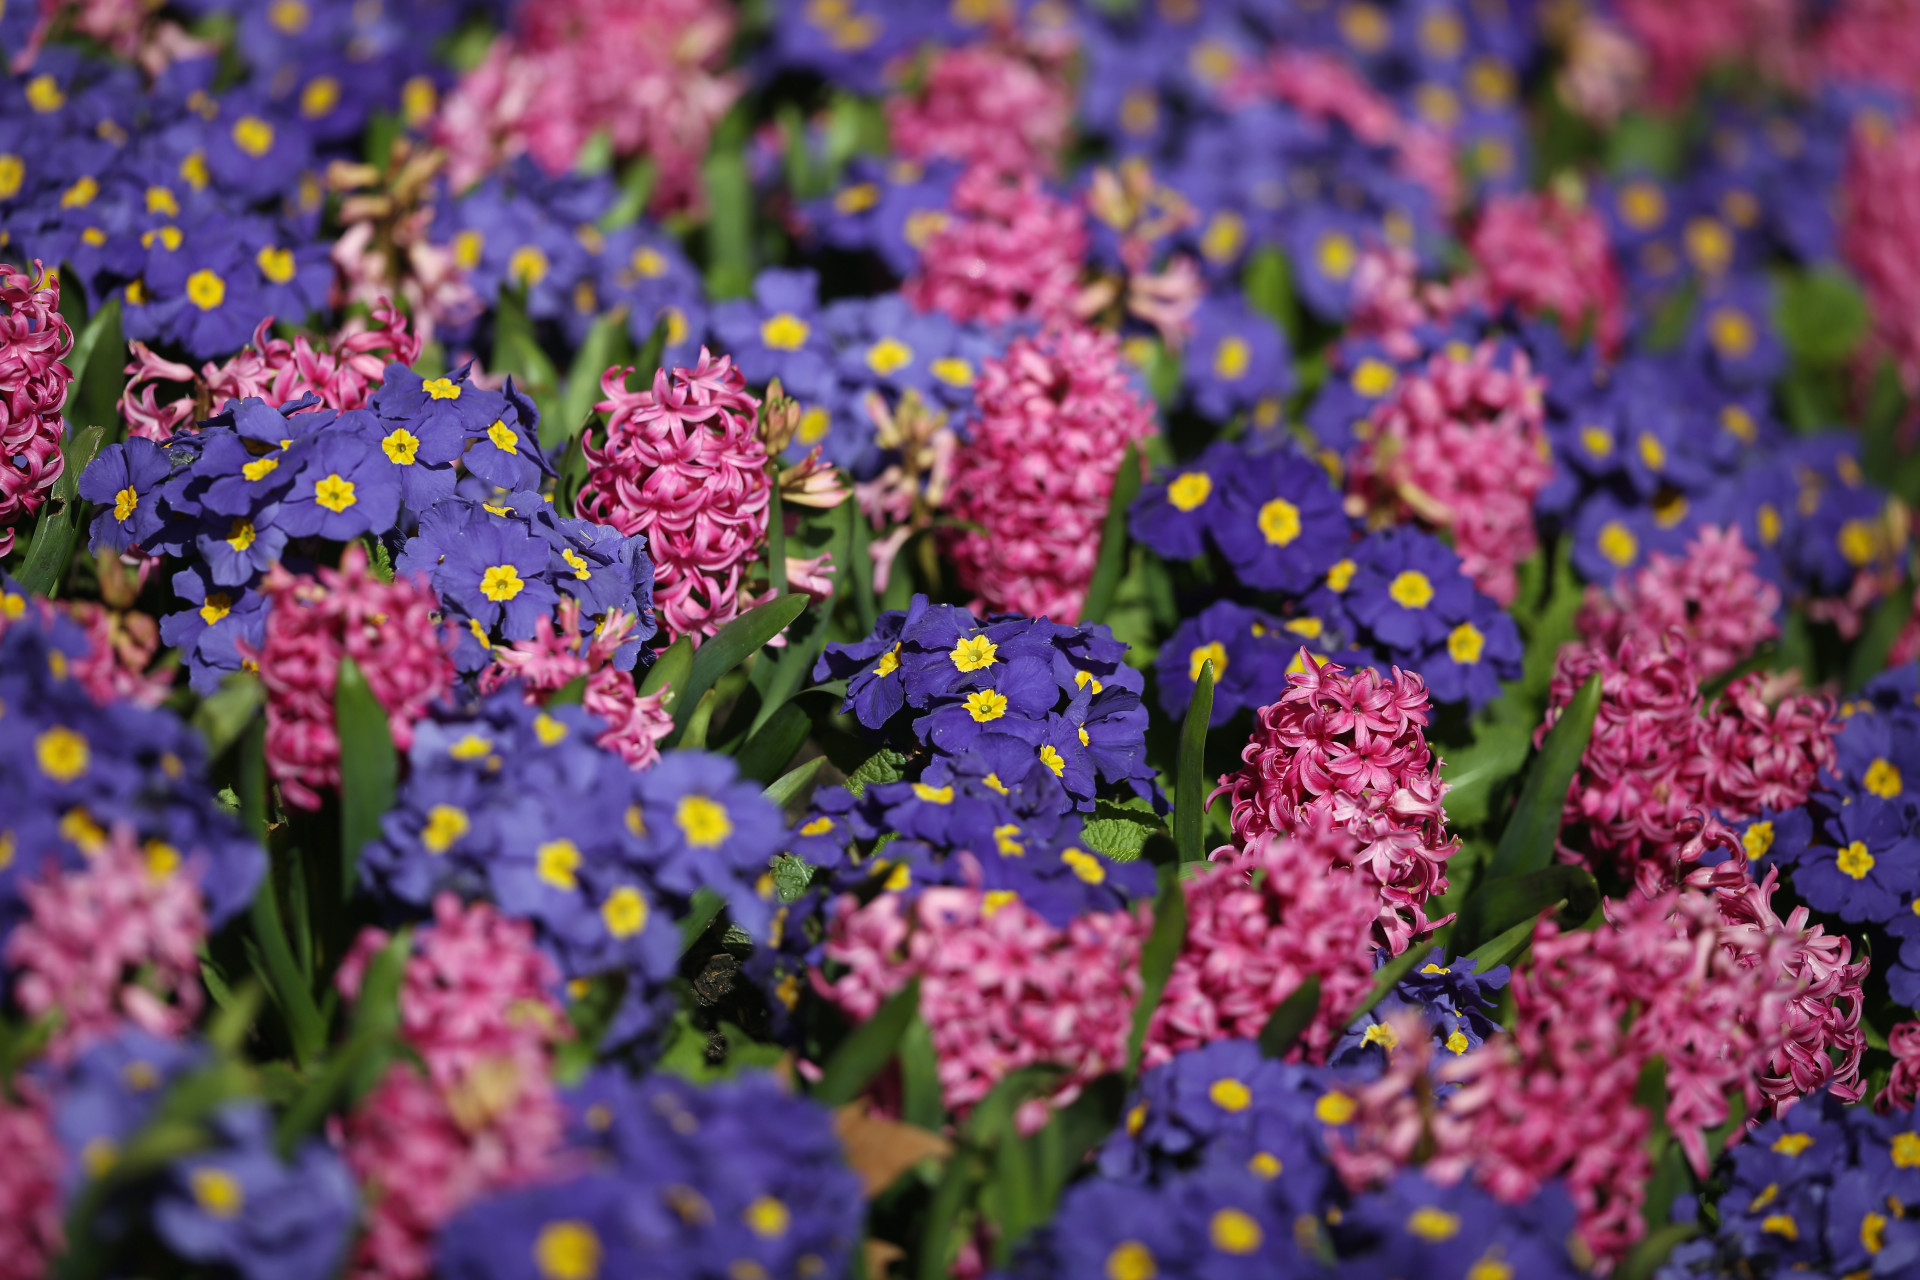 A variety of colourful flowers can be seen blooming at St James' Park in London. <p><a href="https://www.msn.com/en-us/community/channel/vid-7xx8mnucu55yw63we9va2gwr7uihbxwc68fxqp25x6tg4ftibpra?cvid=94631541bc0f4f89bfd59158d696ad7e">Follow us and access great exclusive content every day</a></p>